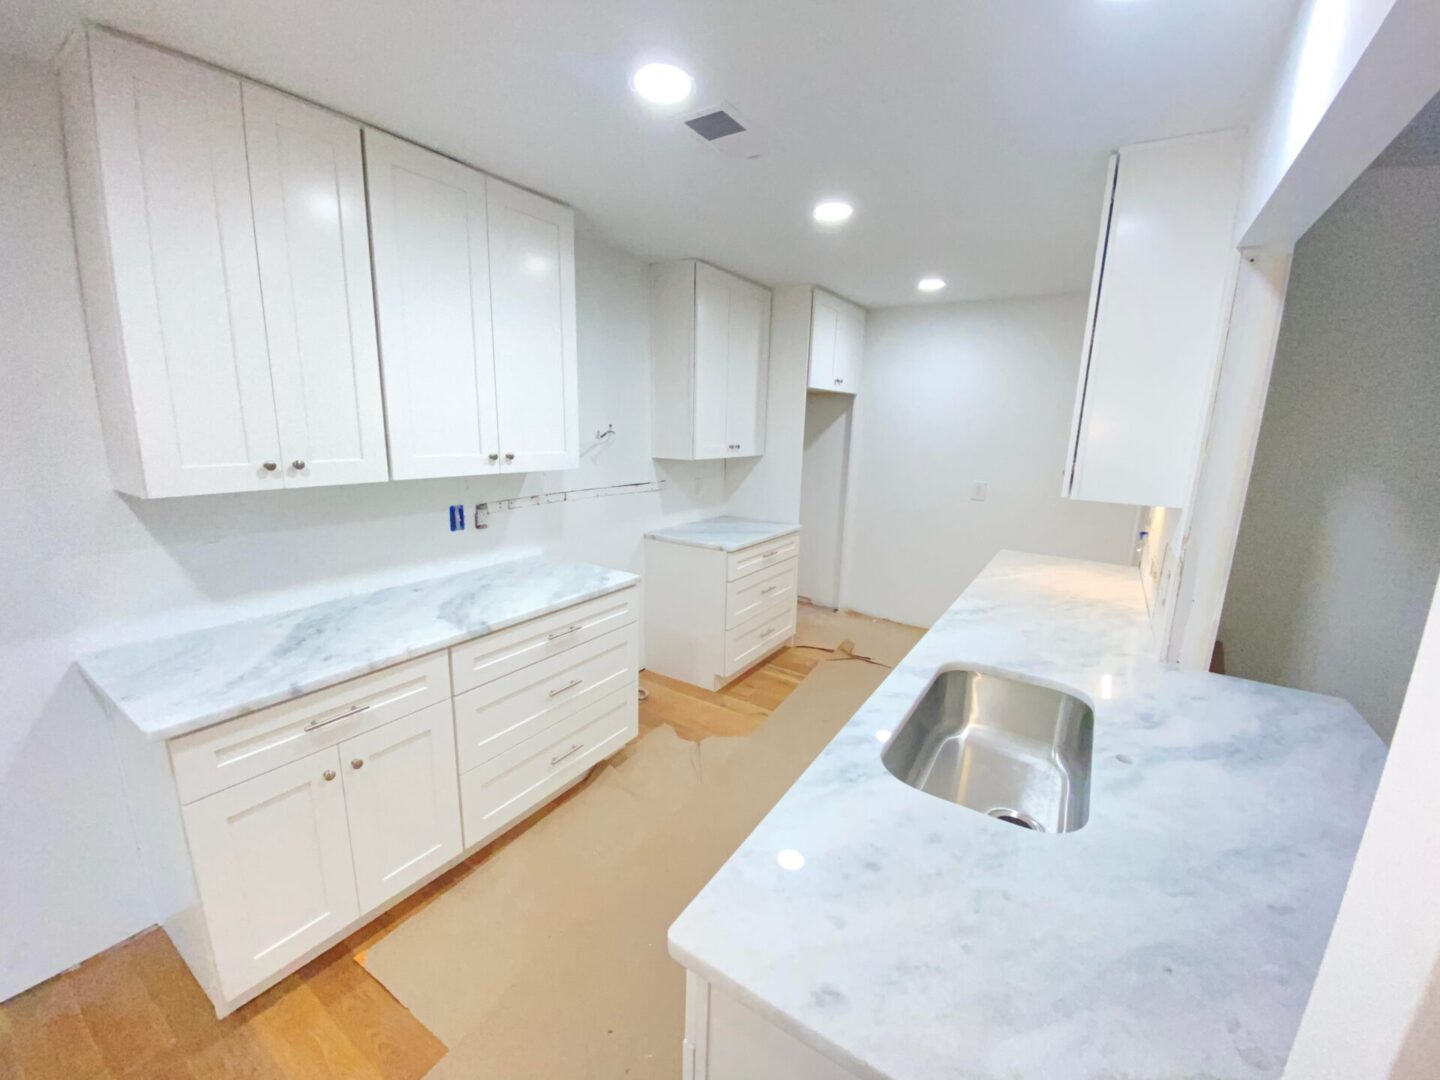 Closeup view of kitchen with white cabinets